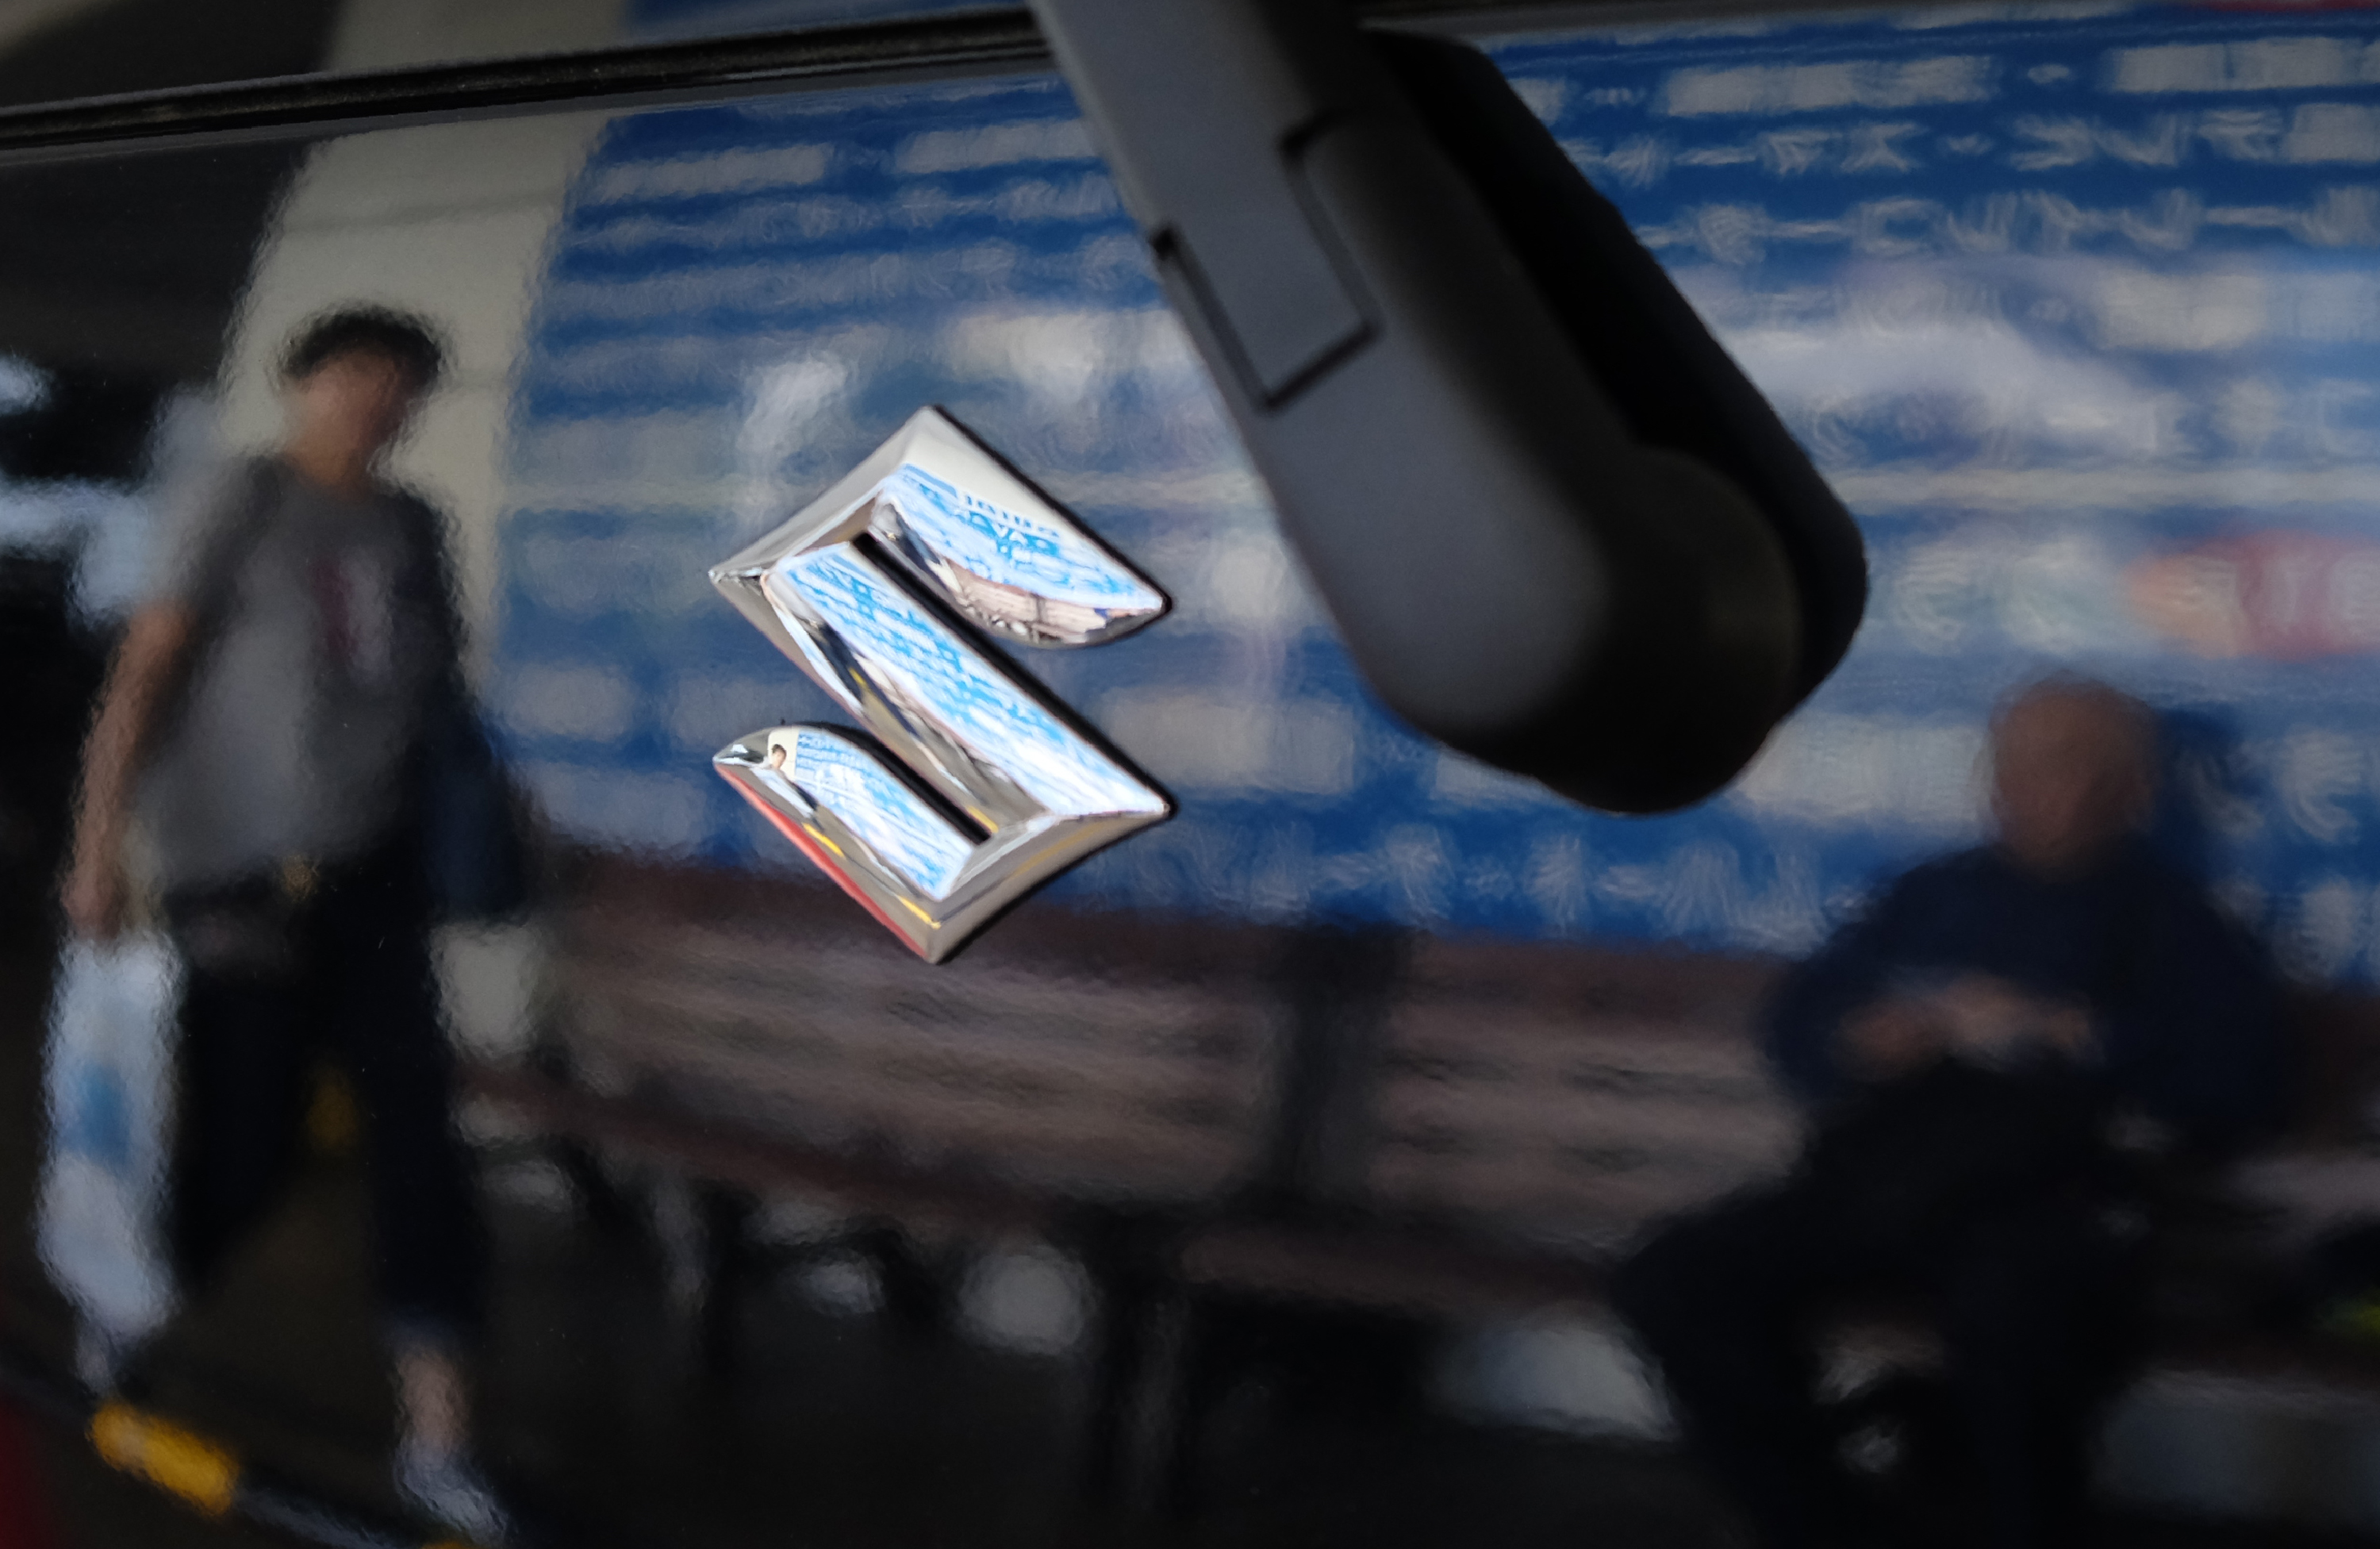 The emblem of Japanese automaker Suzuki Motor is seen on the company's latest compact car in Tokyo on May 18, 2016.  Suzuki Motor on May 18 admitted it found "discrepancies" in its fuel-economy and emissions testing, but denied that it manipulated data to make cars seem more efficient than they were. / AFP PHOTO / KAZUHIRO NOGI